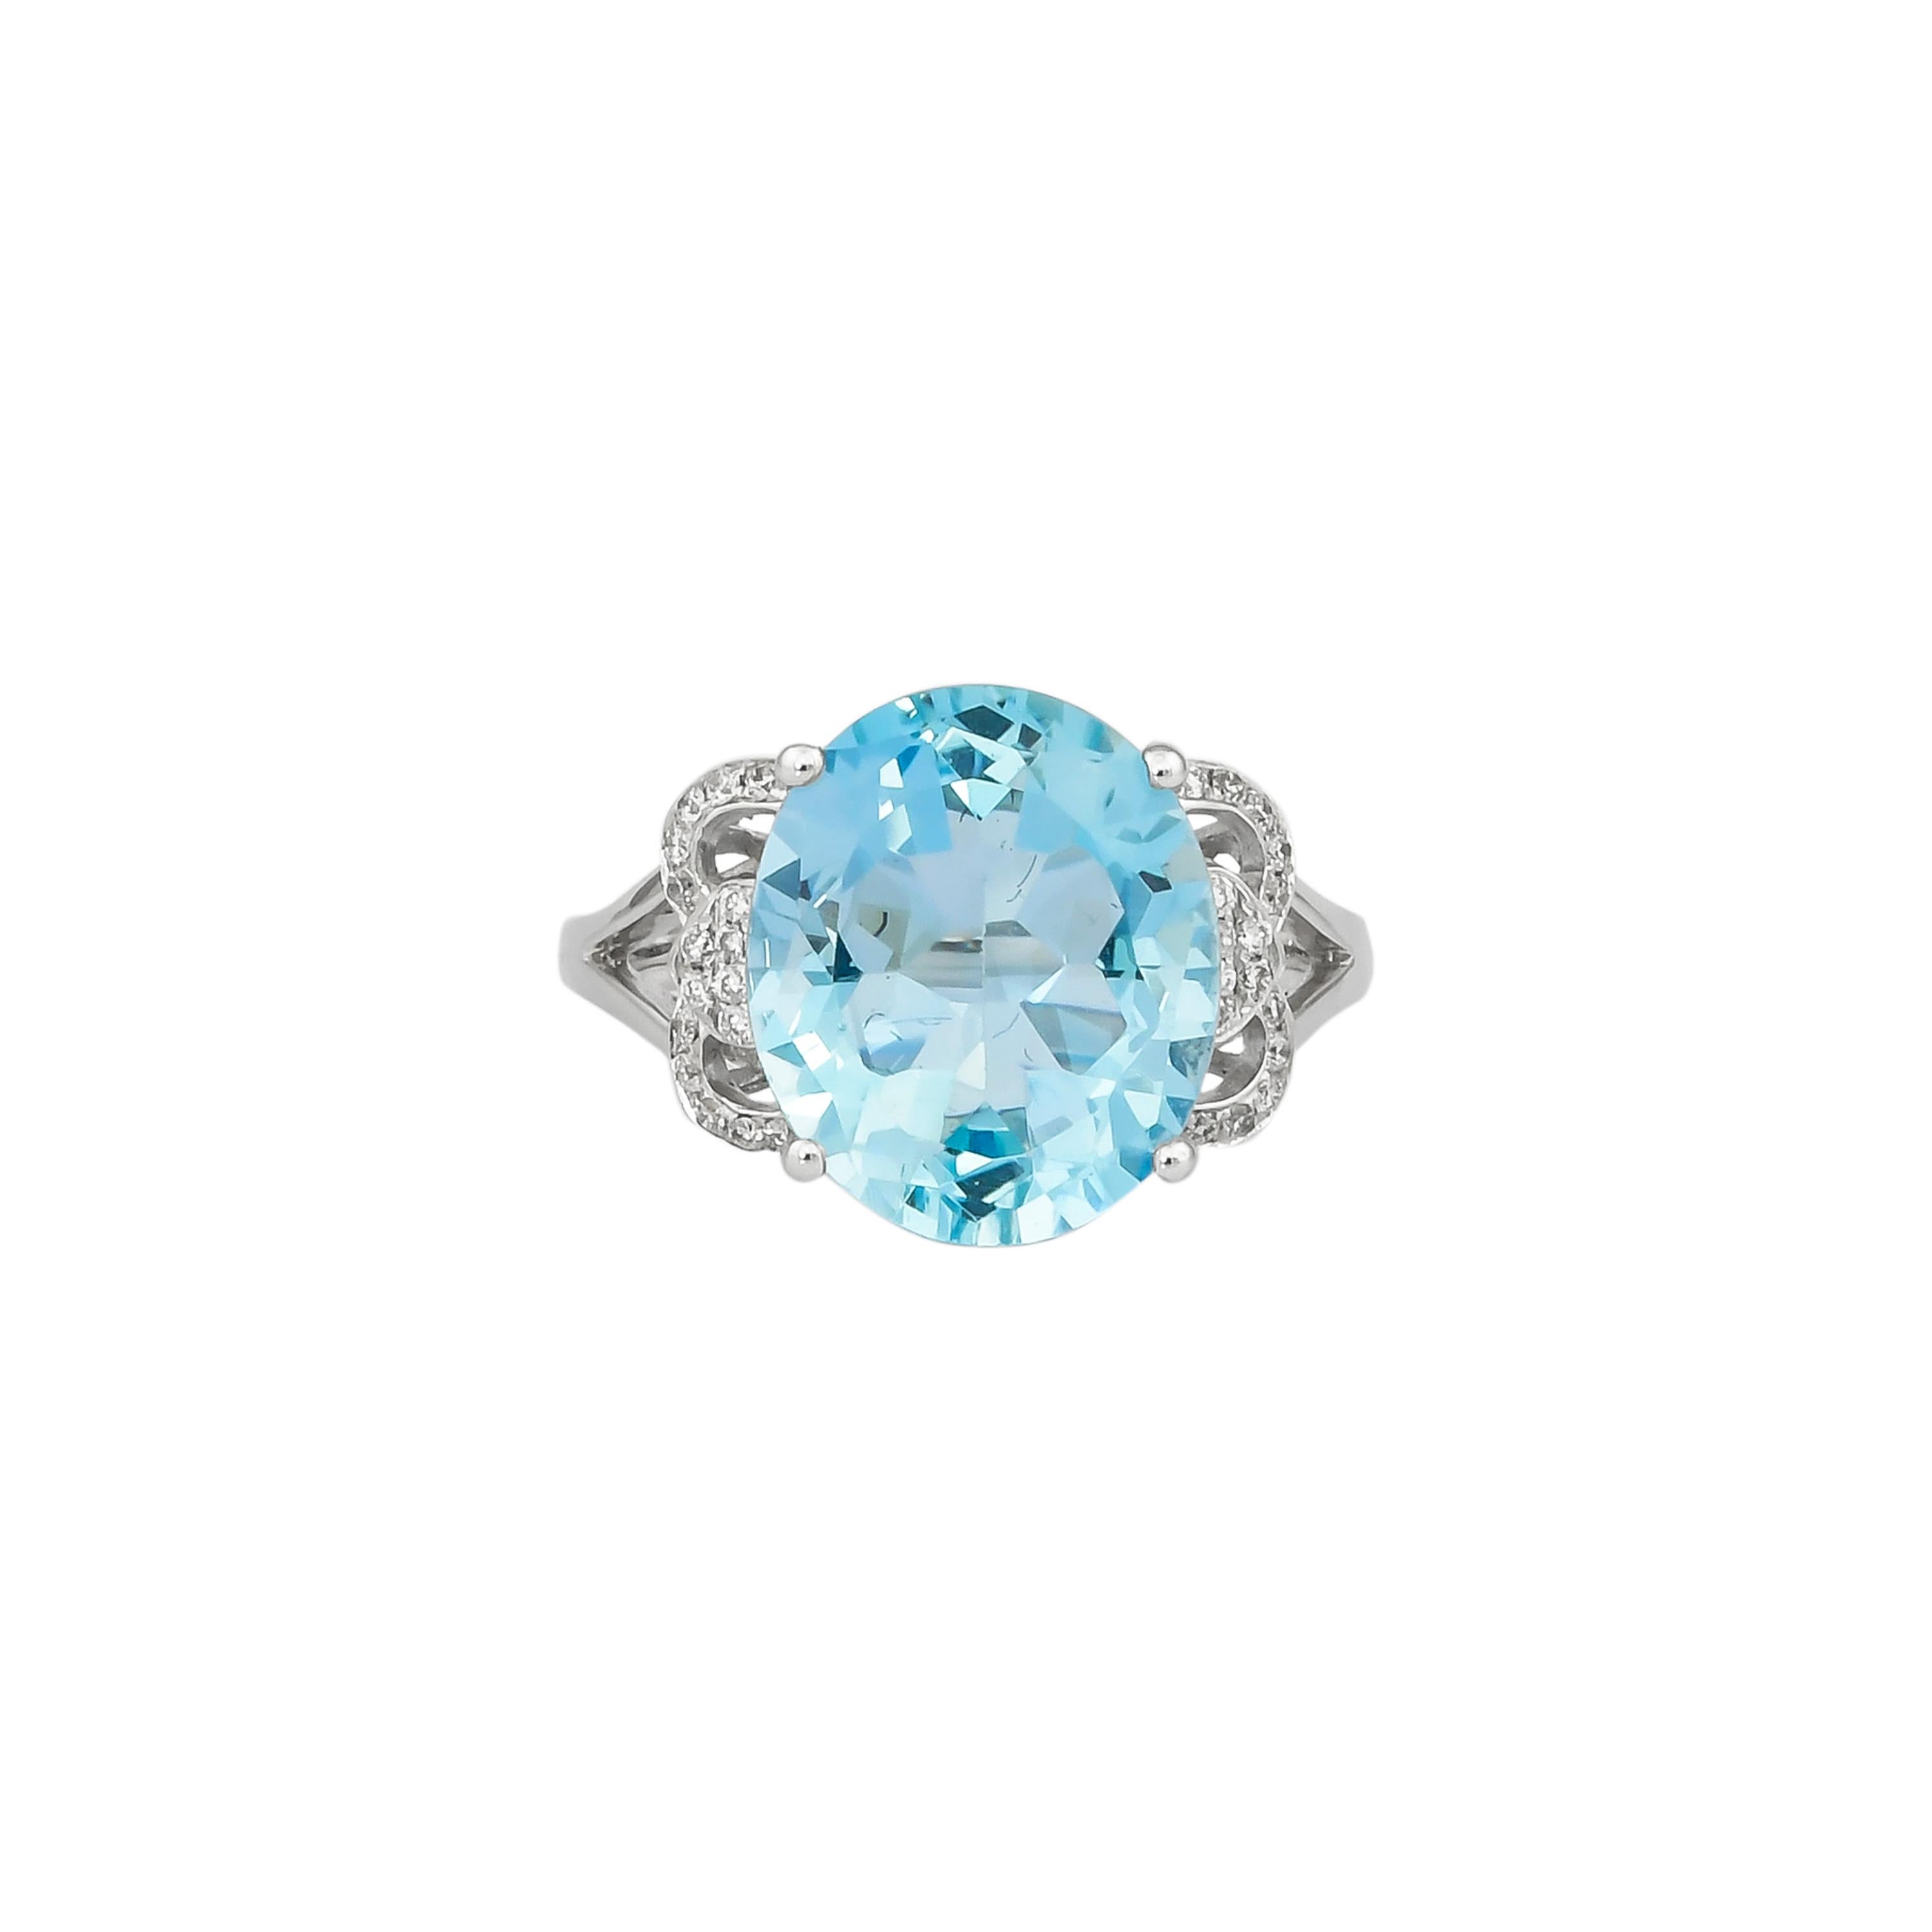 Oval Cut 7.97 Carat Aquamarine and Diamond Ring in 18 Karat White Gold For Sale